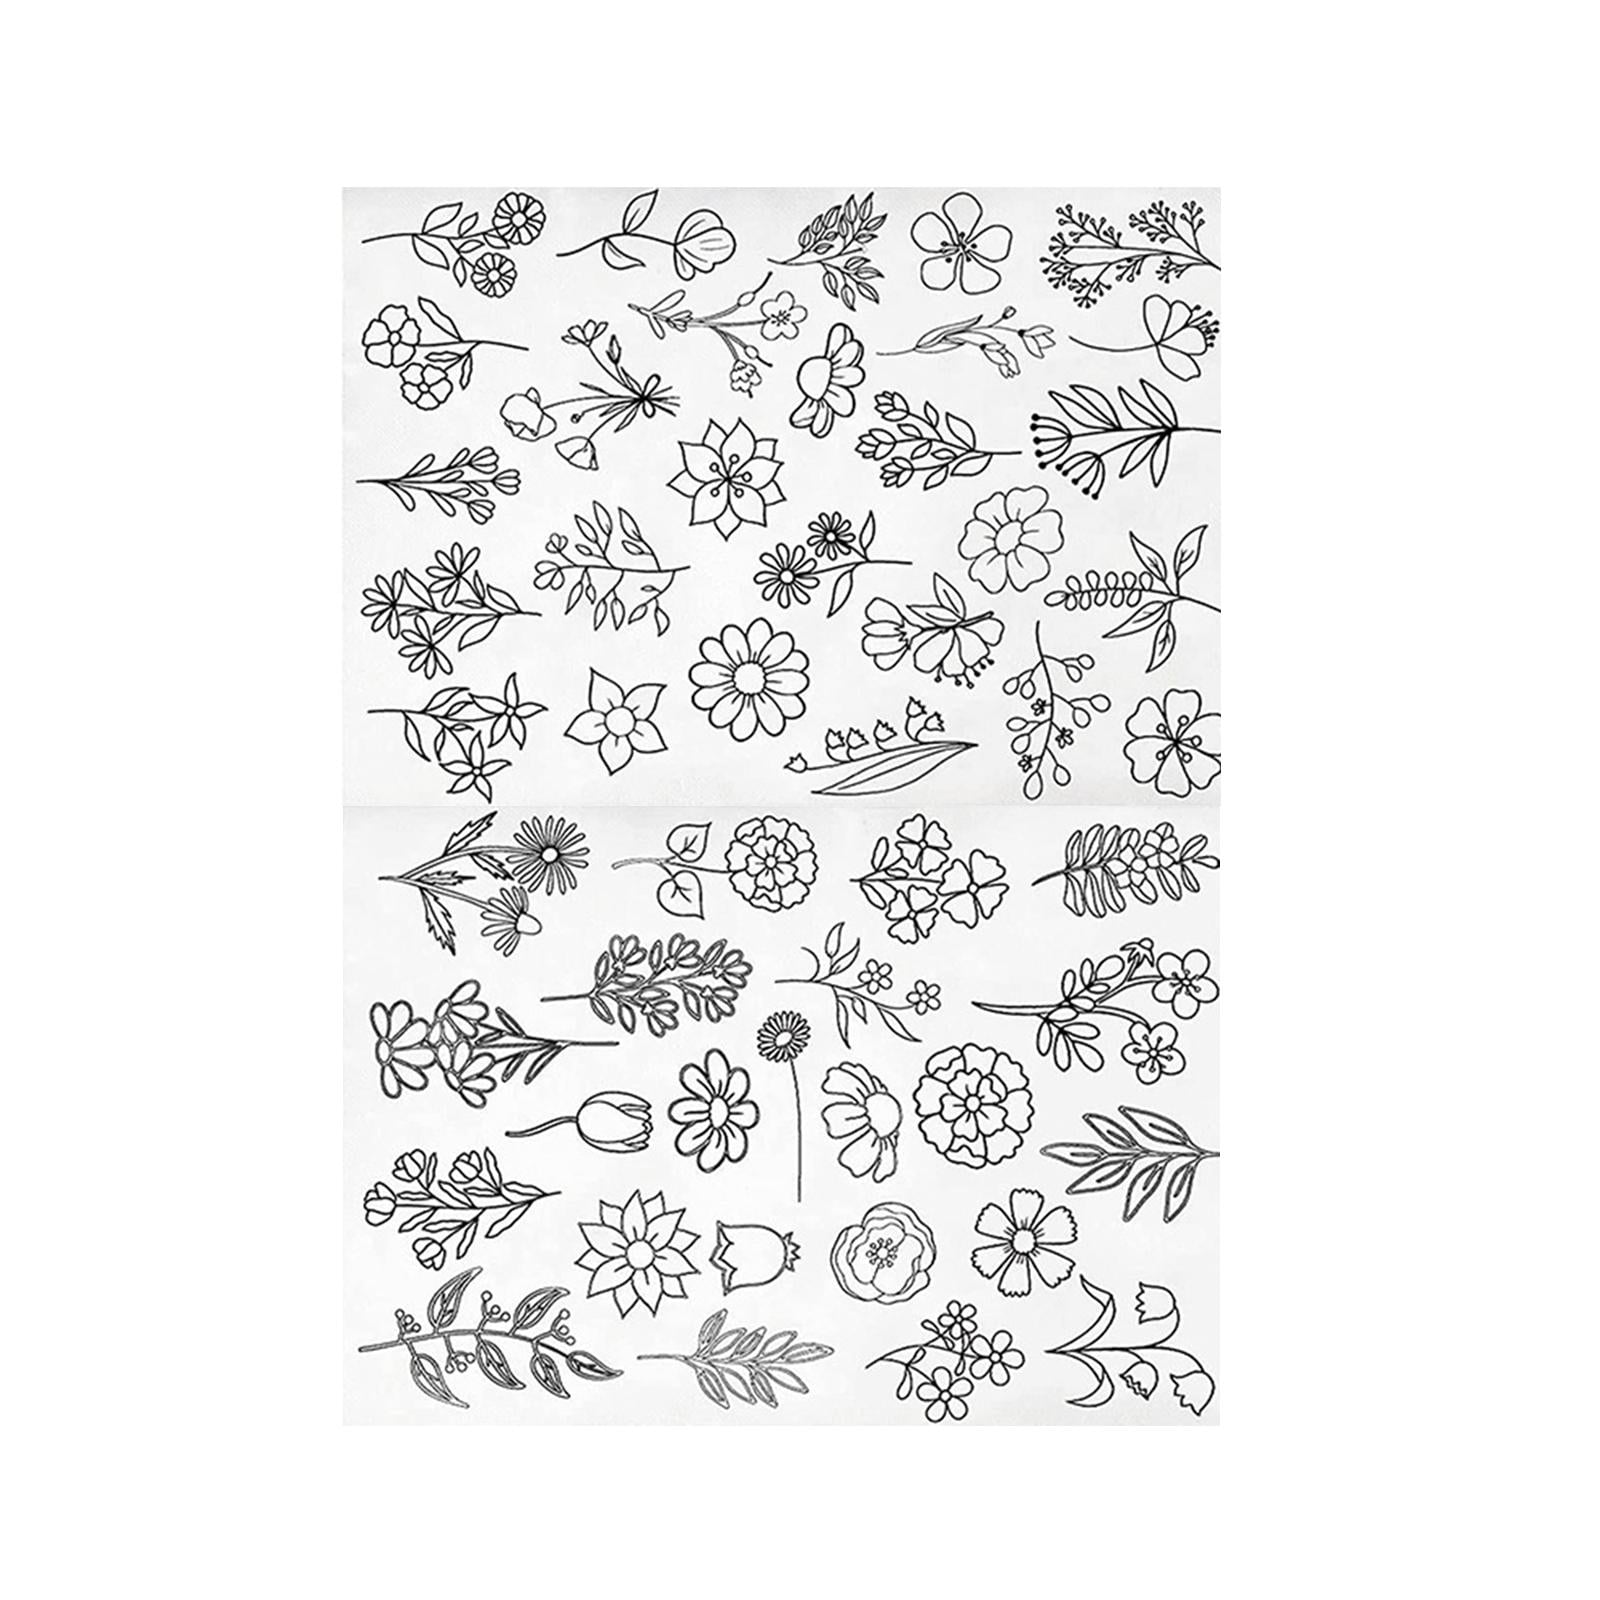  Water Soluble Stabilizer for Embroidery,2 Sheets Flowers and  Plants Theme Stick and Stitch Embroidery Paper Stick and Stitch Embroidery  Designs Embroidery Transfer Patterns Embroidery Patterns